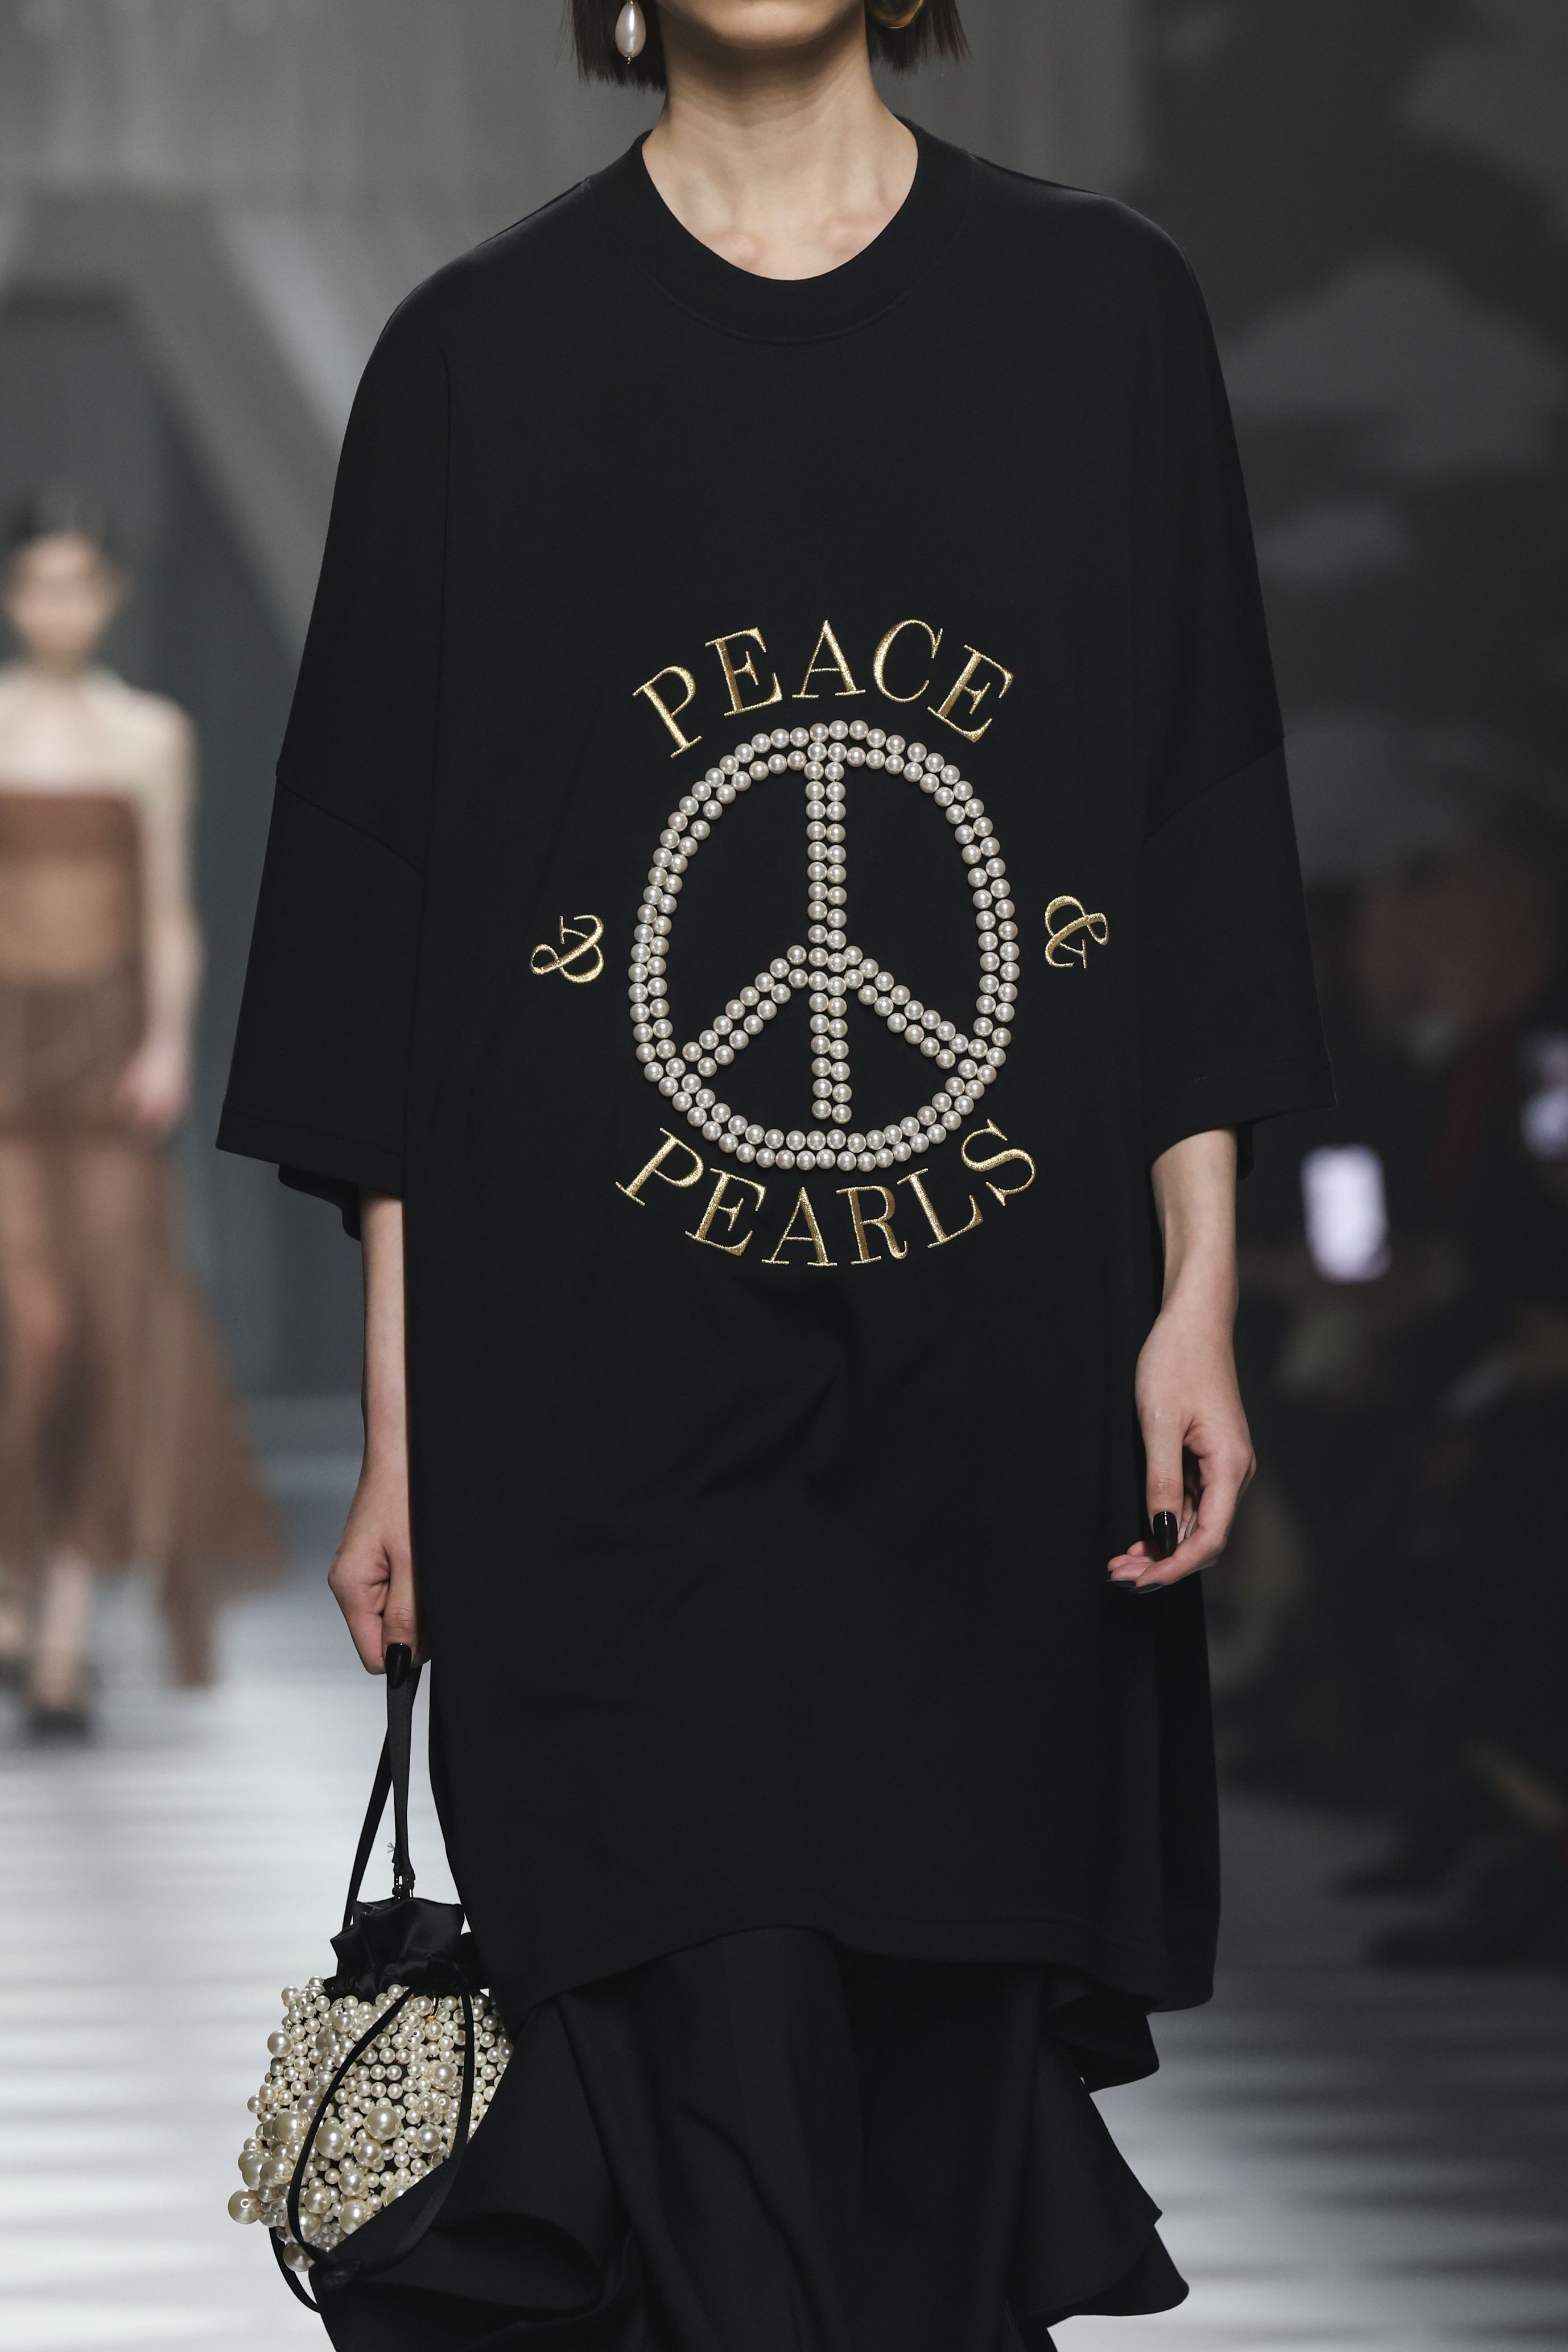 Appiolaza said it was "natural" that Franco Moschino's famous "peace" theme appeared in his first show.